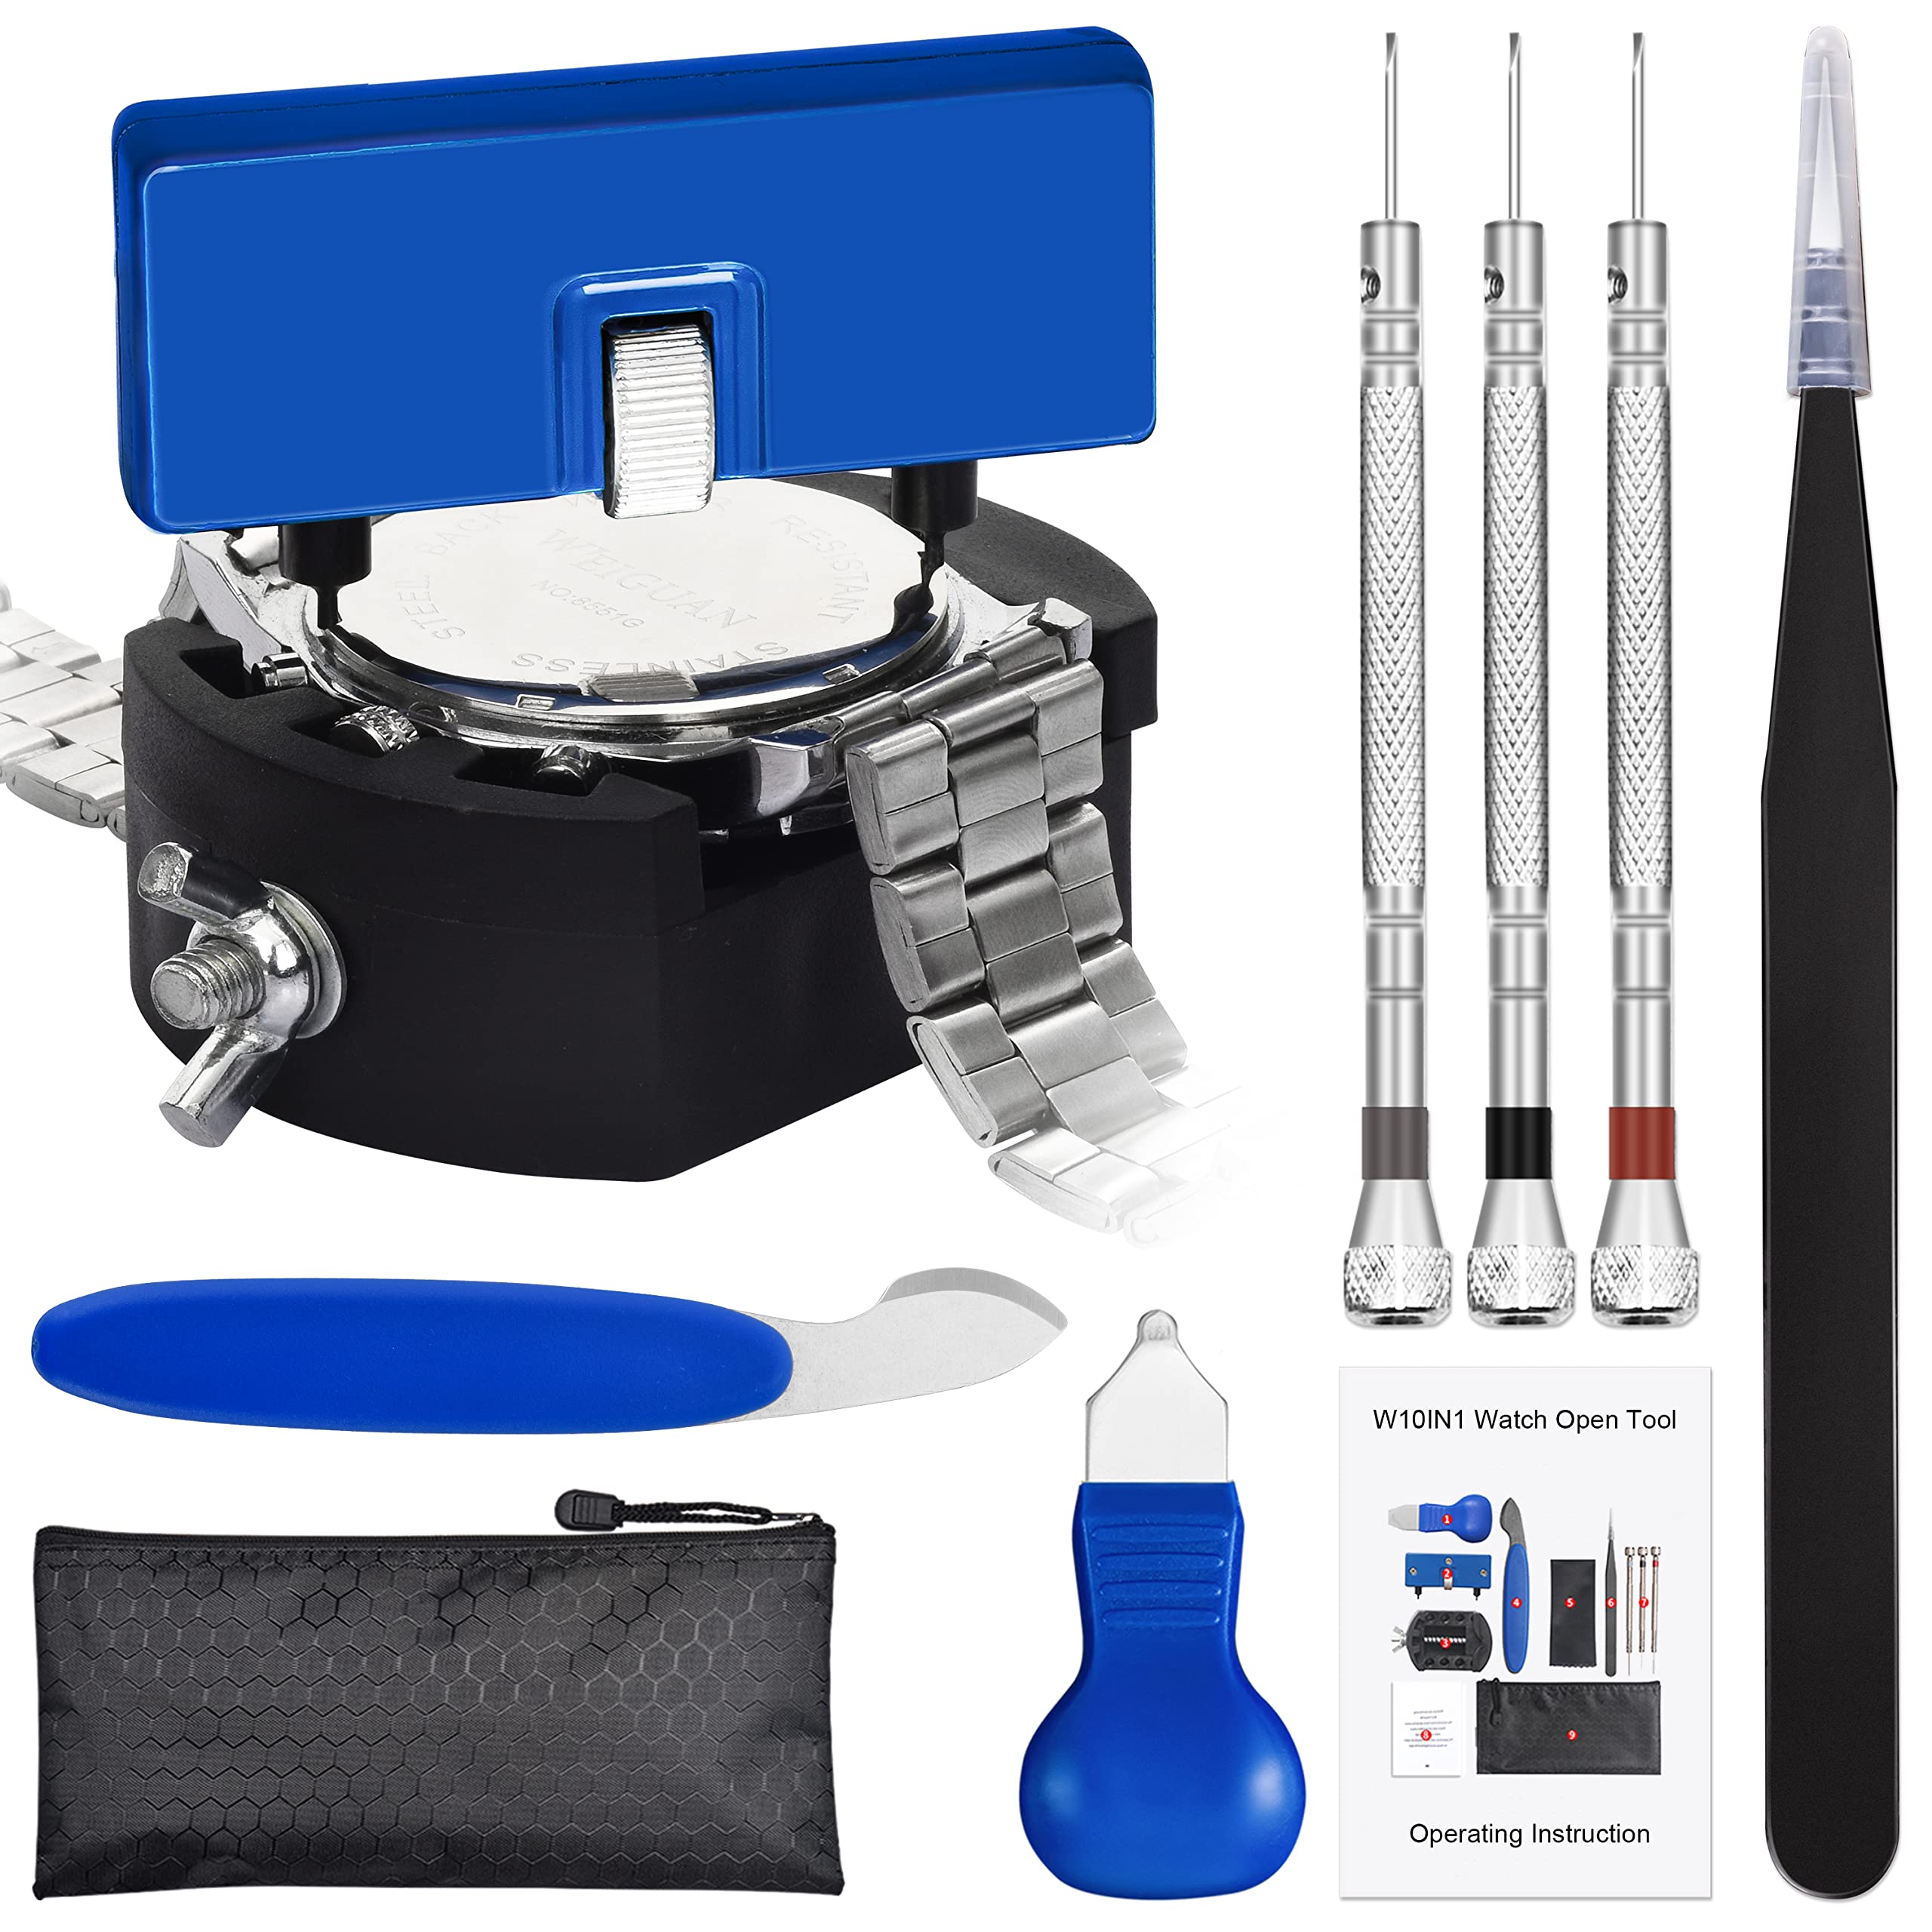 Watch Battery Replacement Kit，Unamela Watch Repair Kit，Watch Back Remover tool and Watch Opener Including 3 Kinds of Removal Tools and Manual, can be Used to Replace The Battery and o-Ring